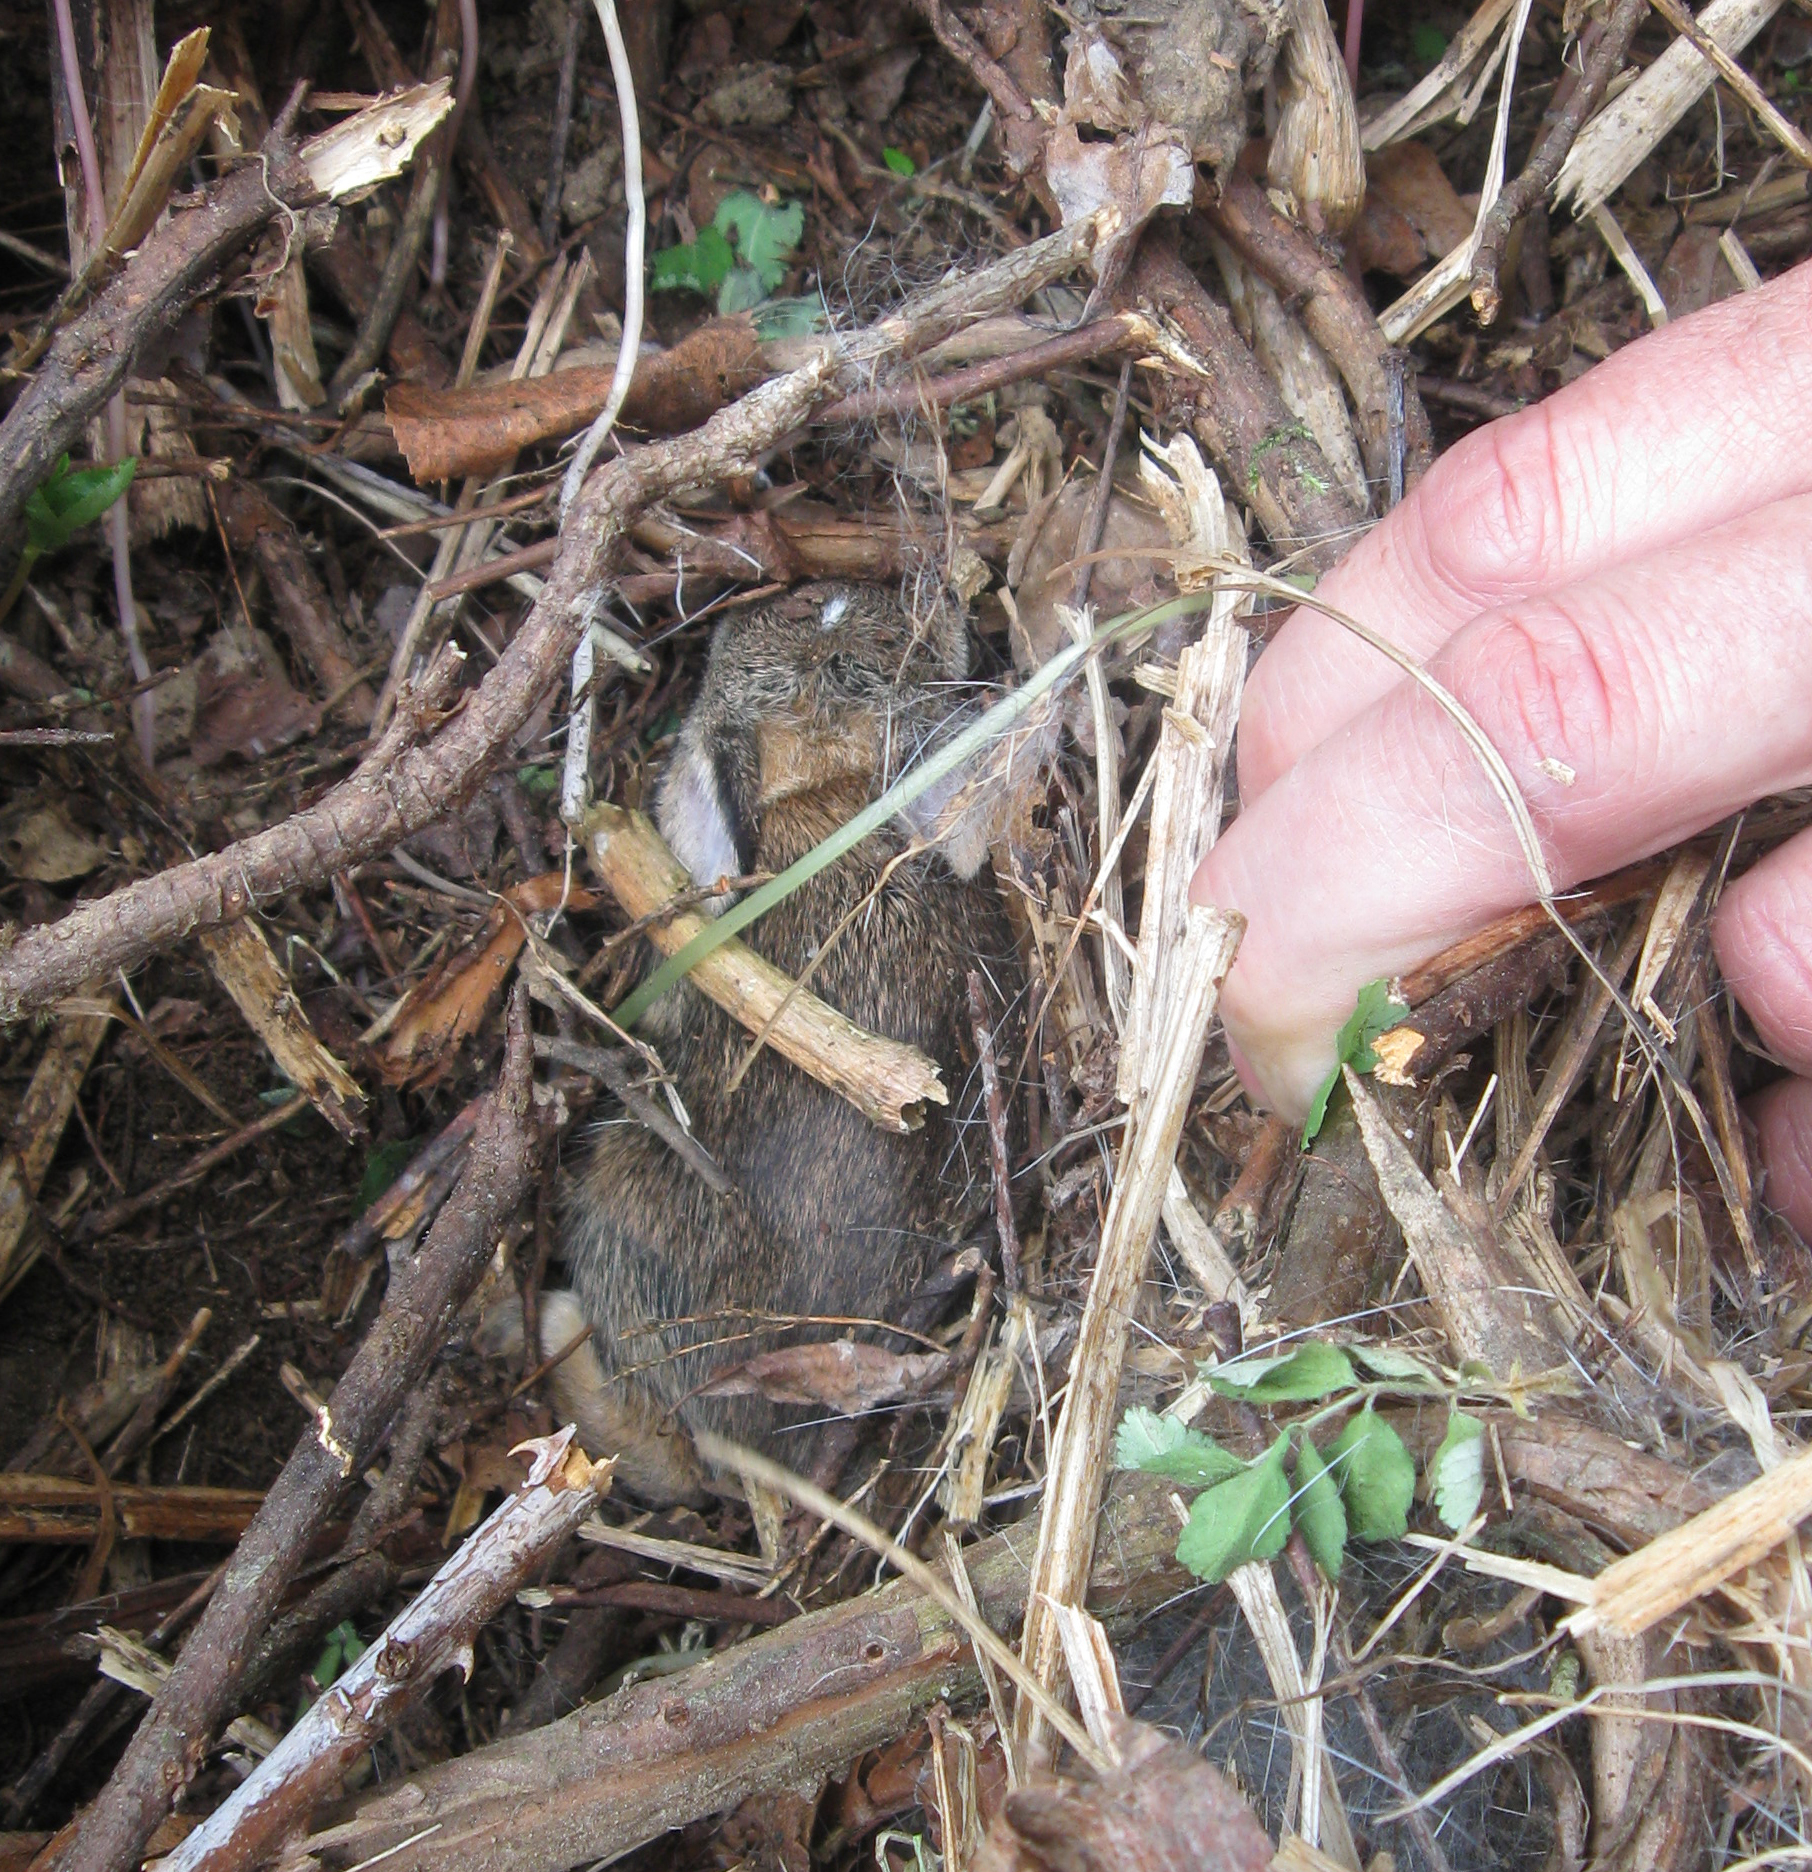 A juvenile eastern cottontail in a nest.